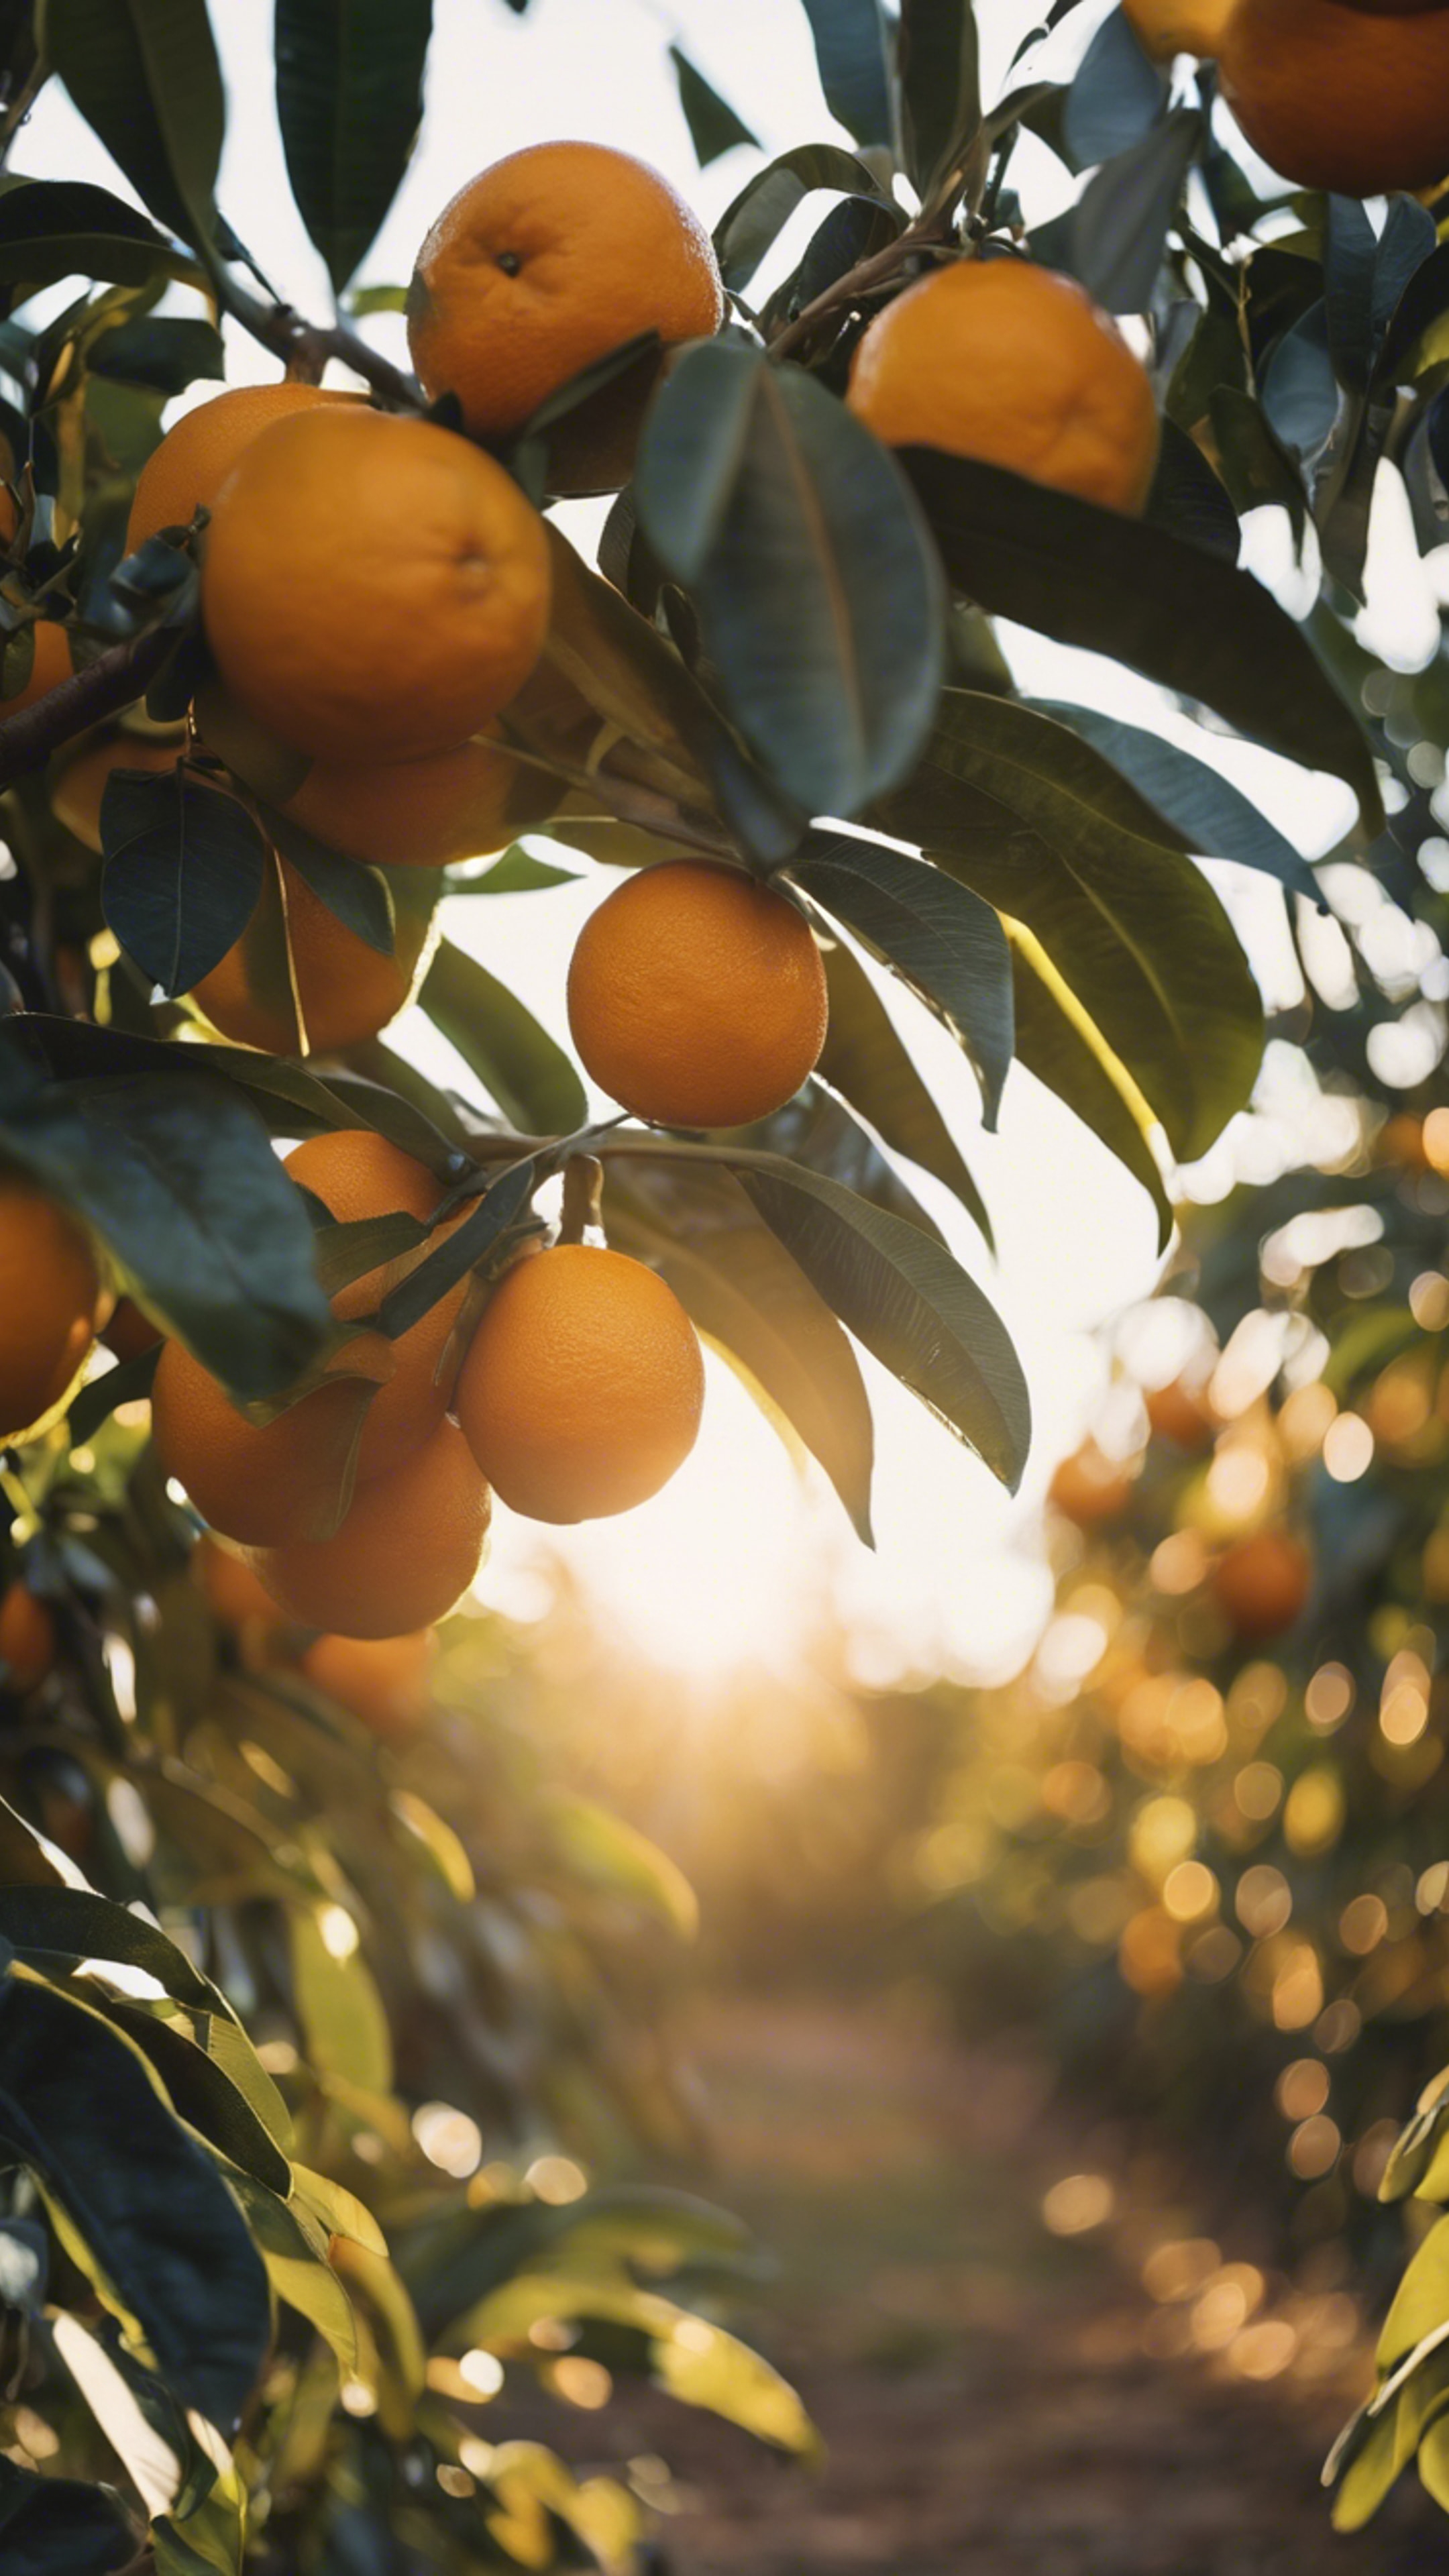 An orange grove in central Florida, with the sun casting a golden hue over ripe oranges ready for harvest. Tapeta[4bbebc31cb8441e2b681]